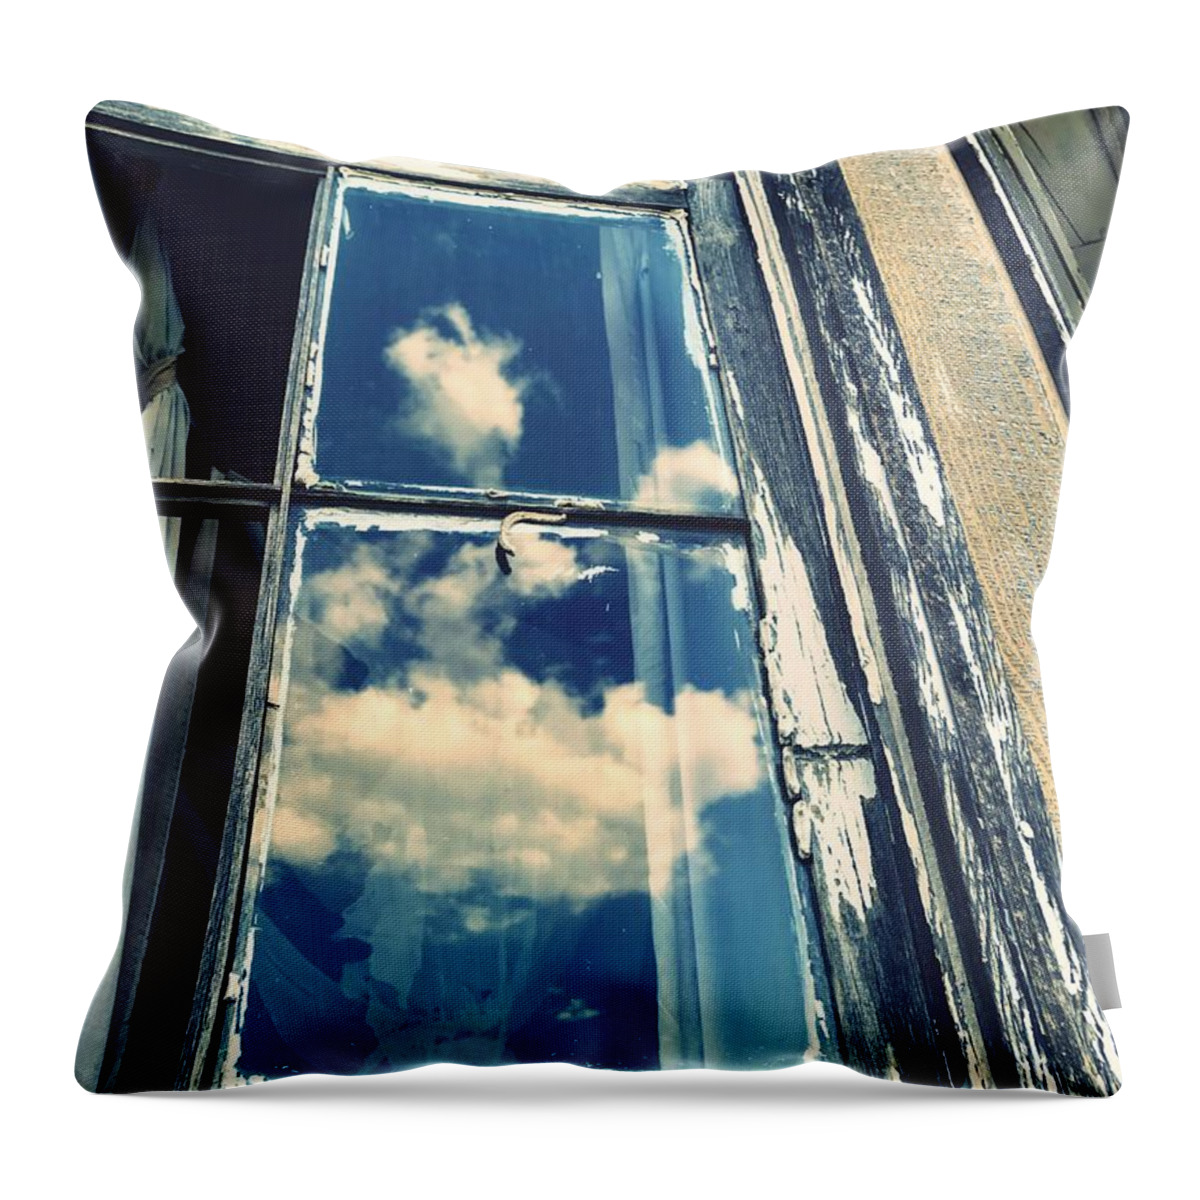 Window Throw Pillow featuring the photograph In Through The Clouds by Brad Hodges